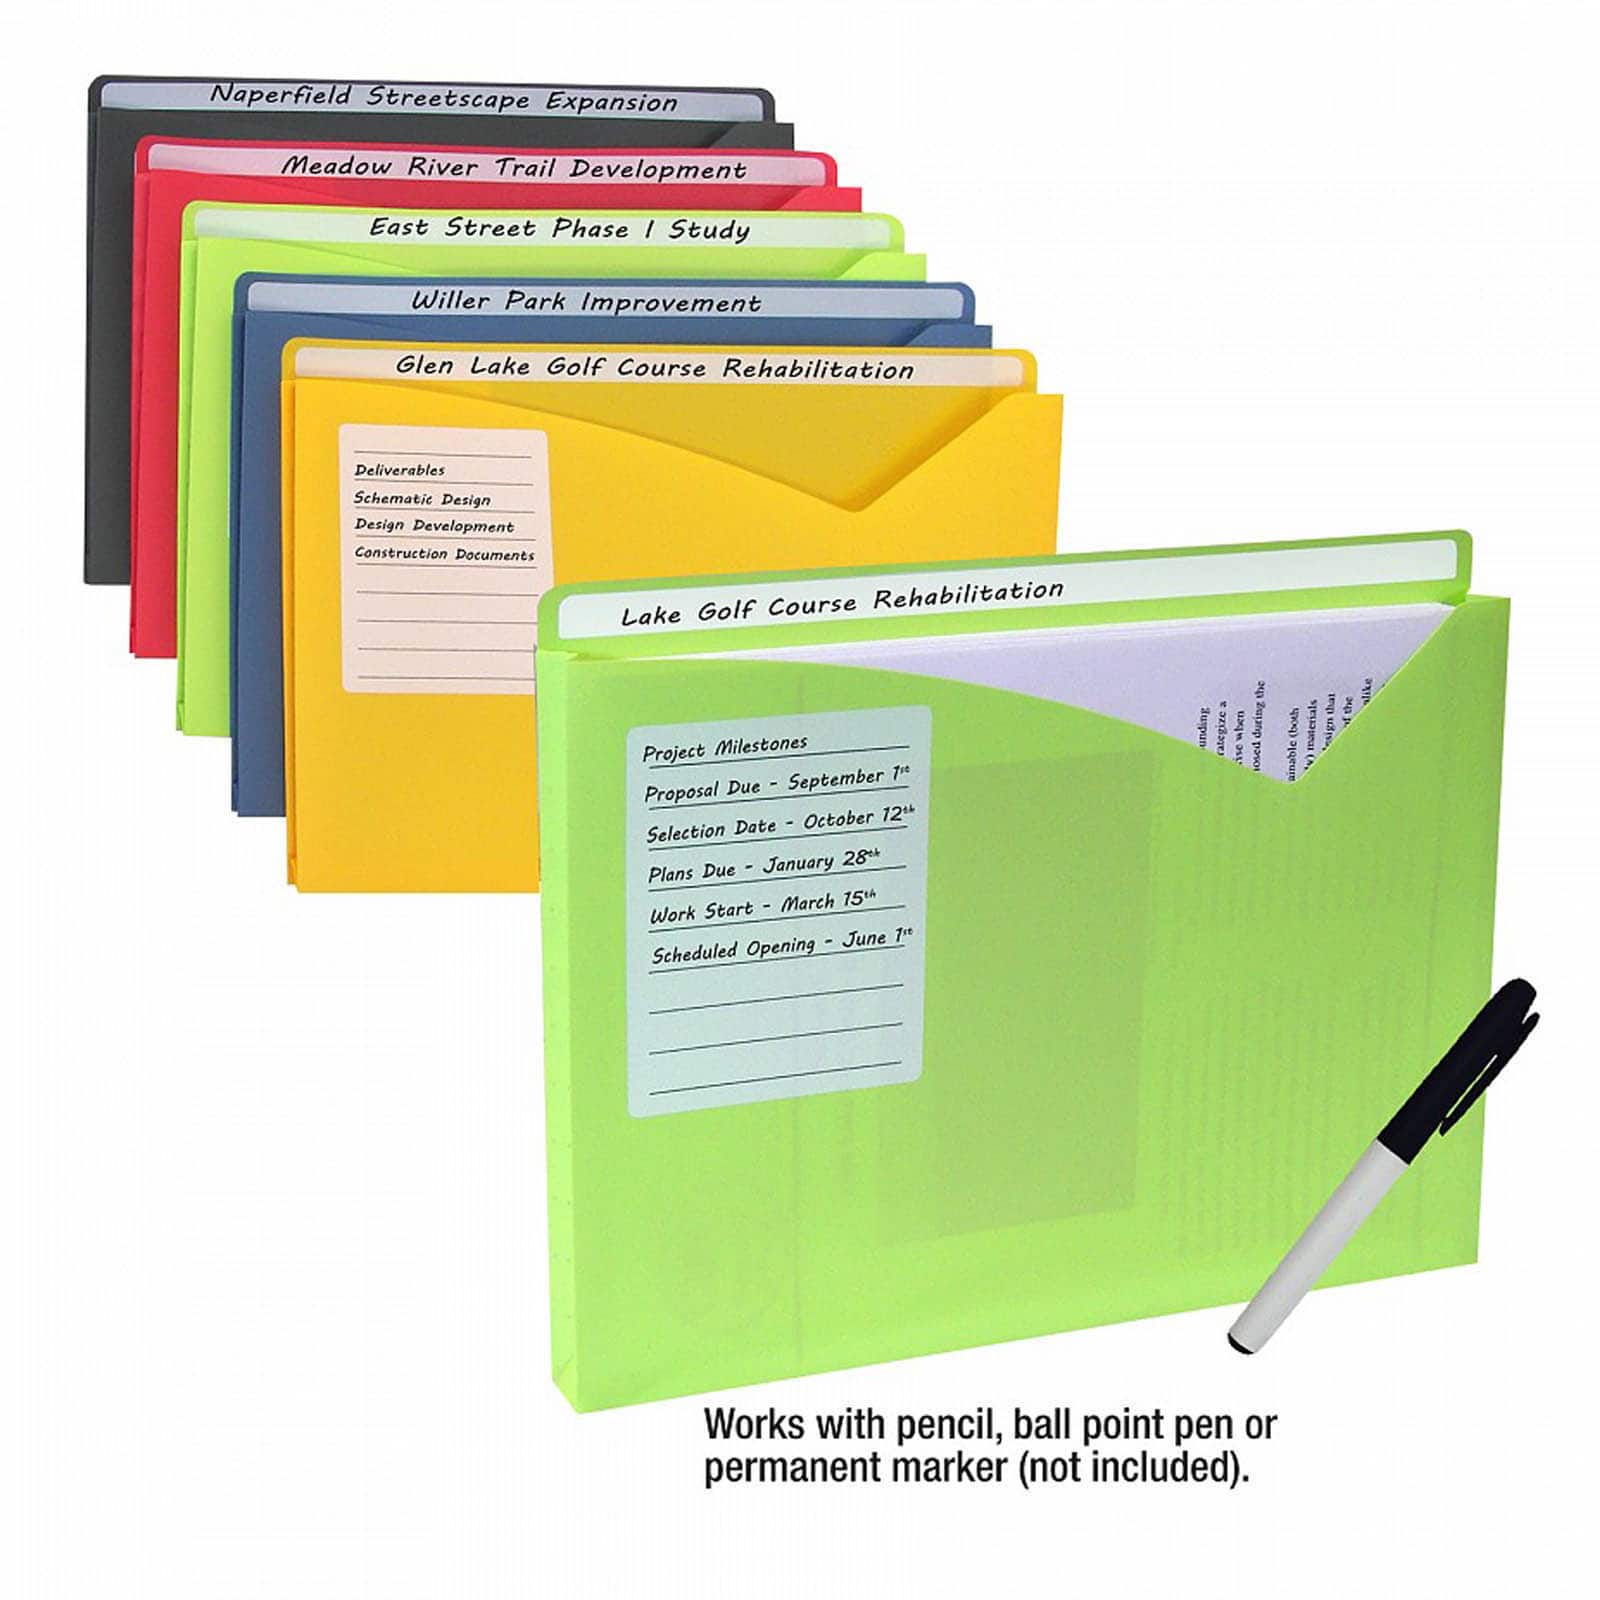 C-Line&#xAE; Assorted Colors Write-On Poly File Jackets, 25ct.